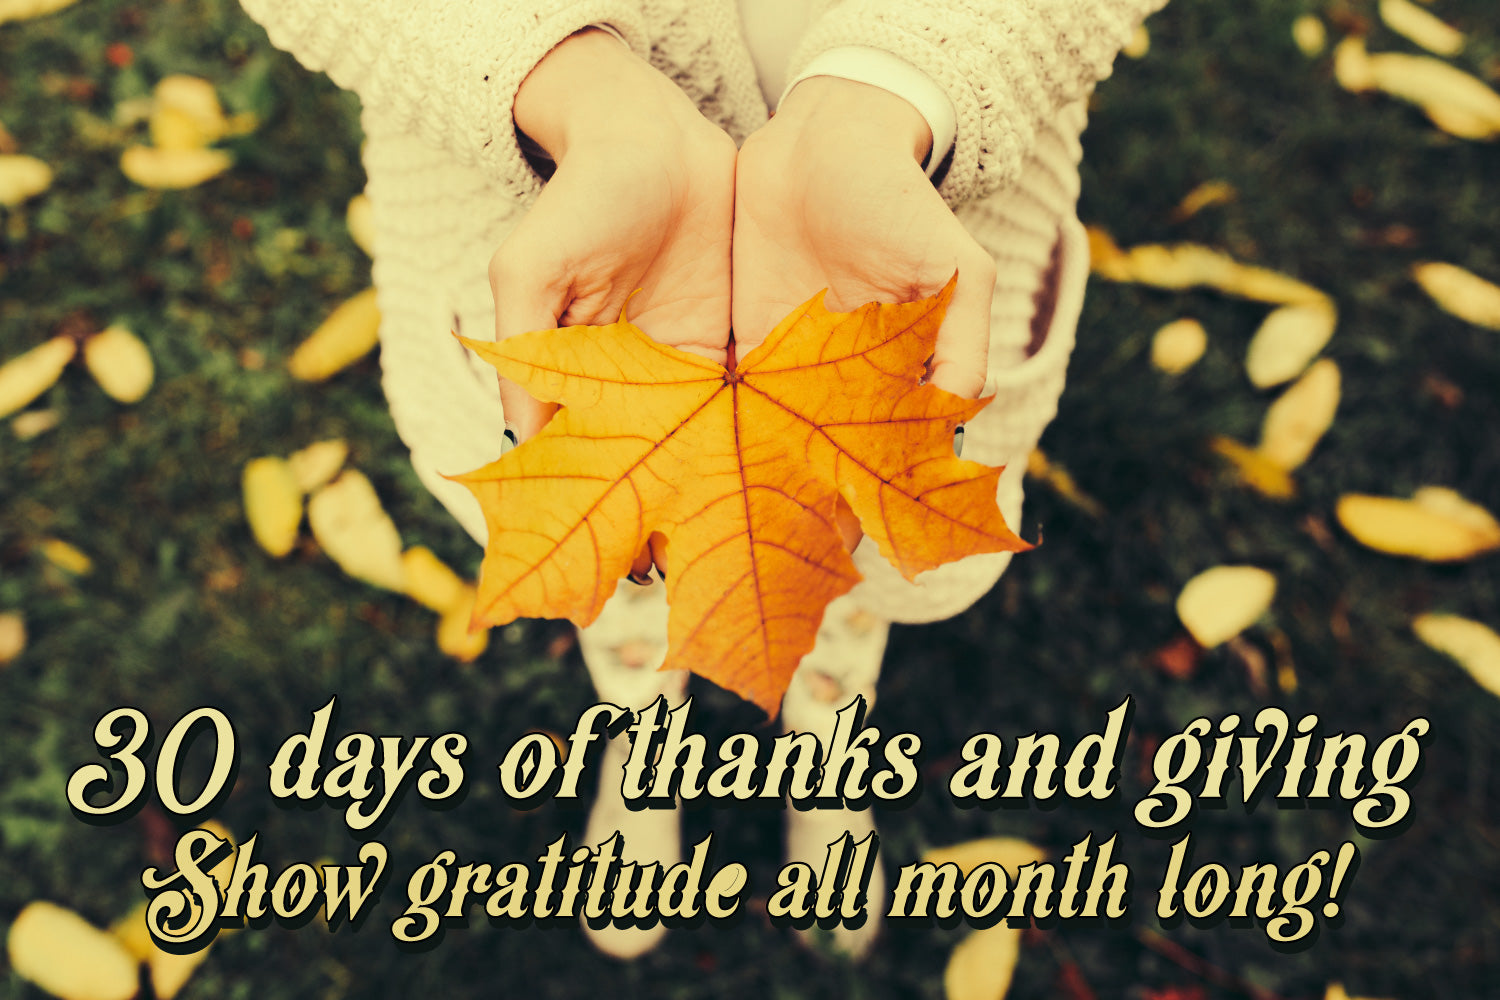 30 days of thanks and giving